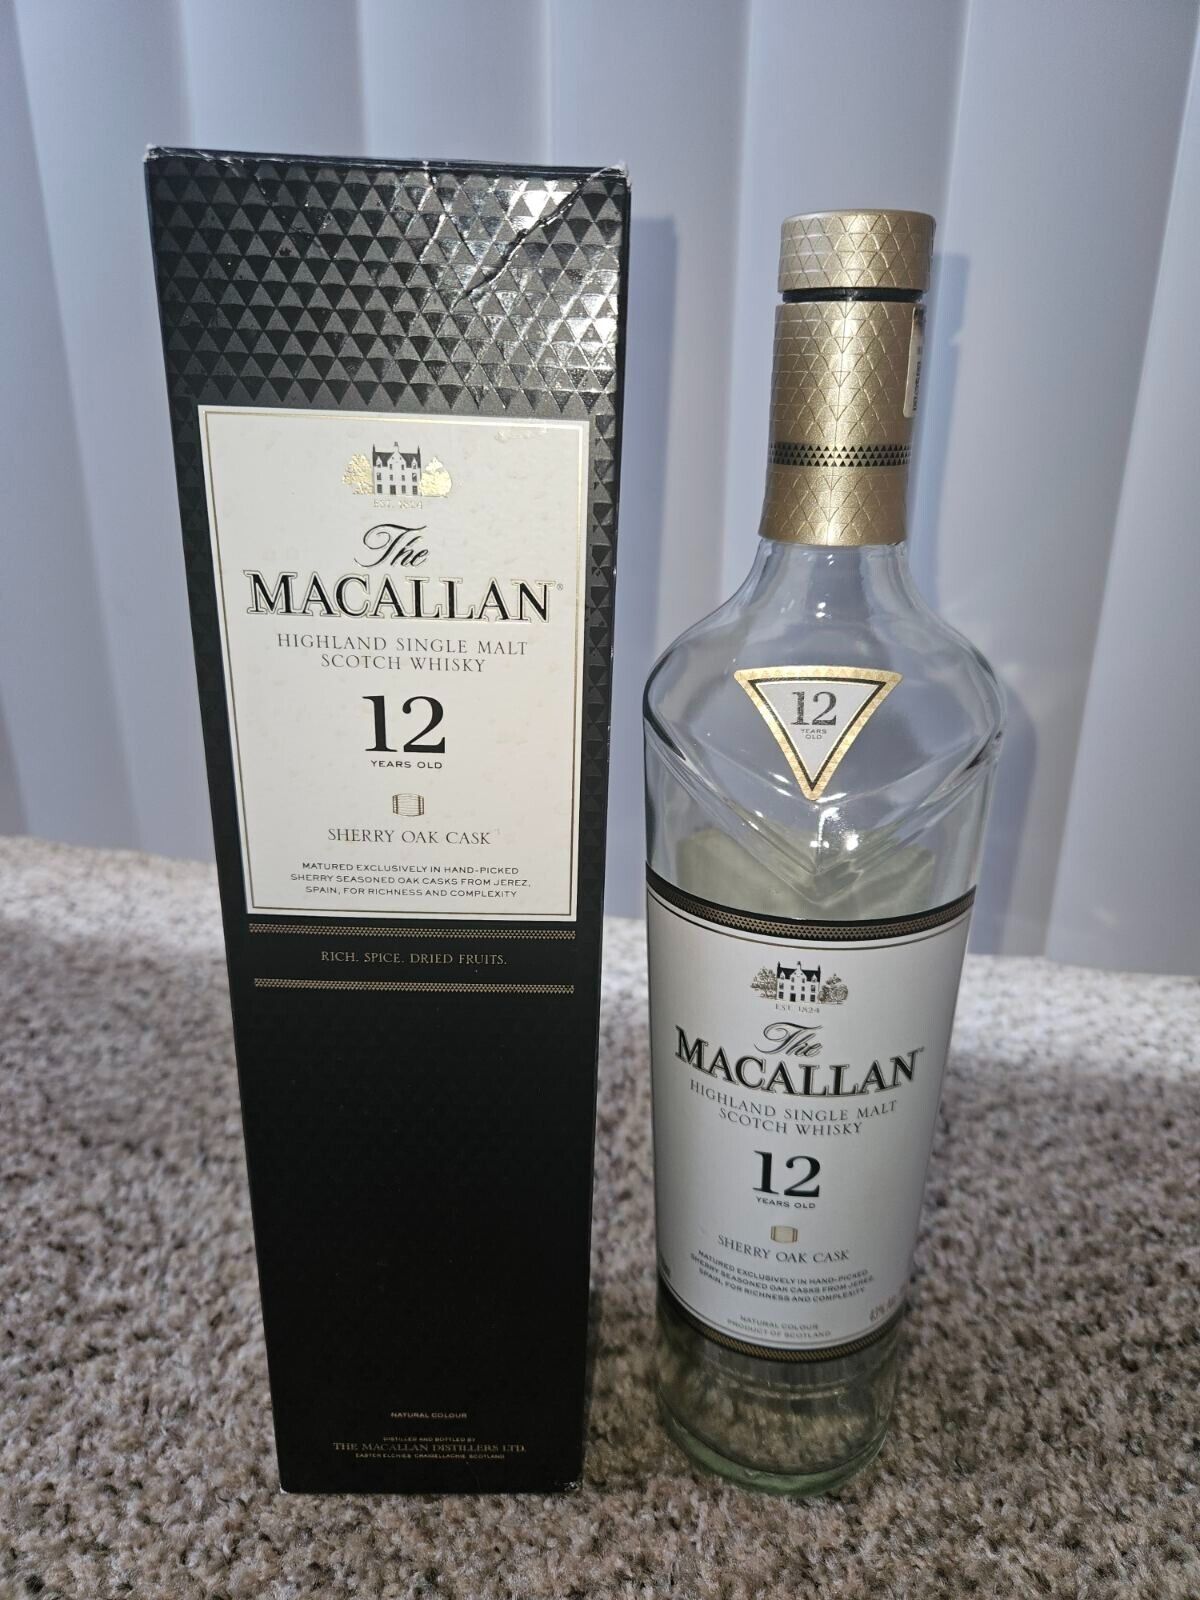 MACALLAN 12 years old empty BOTTLE with cork Scotch Whisky oak cask And BOX